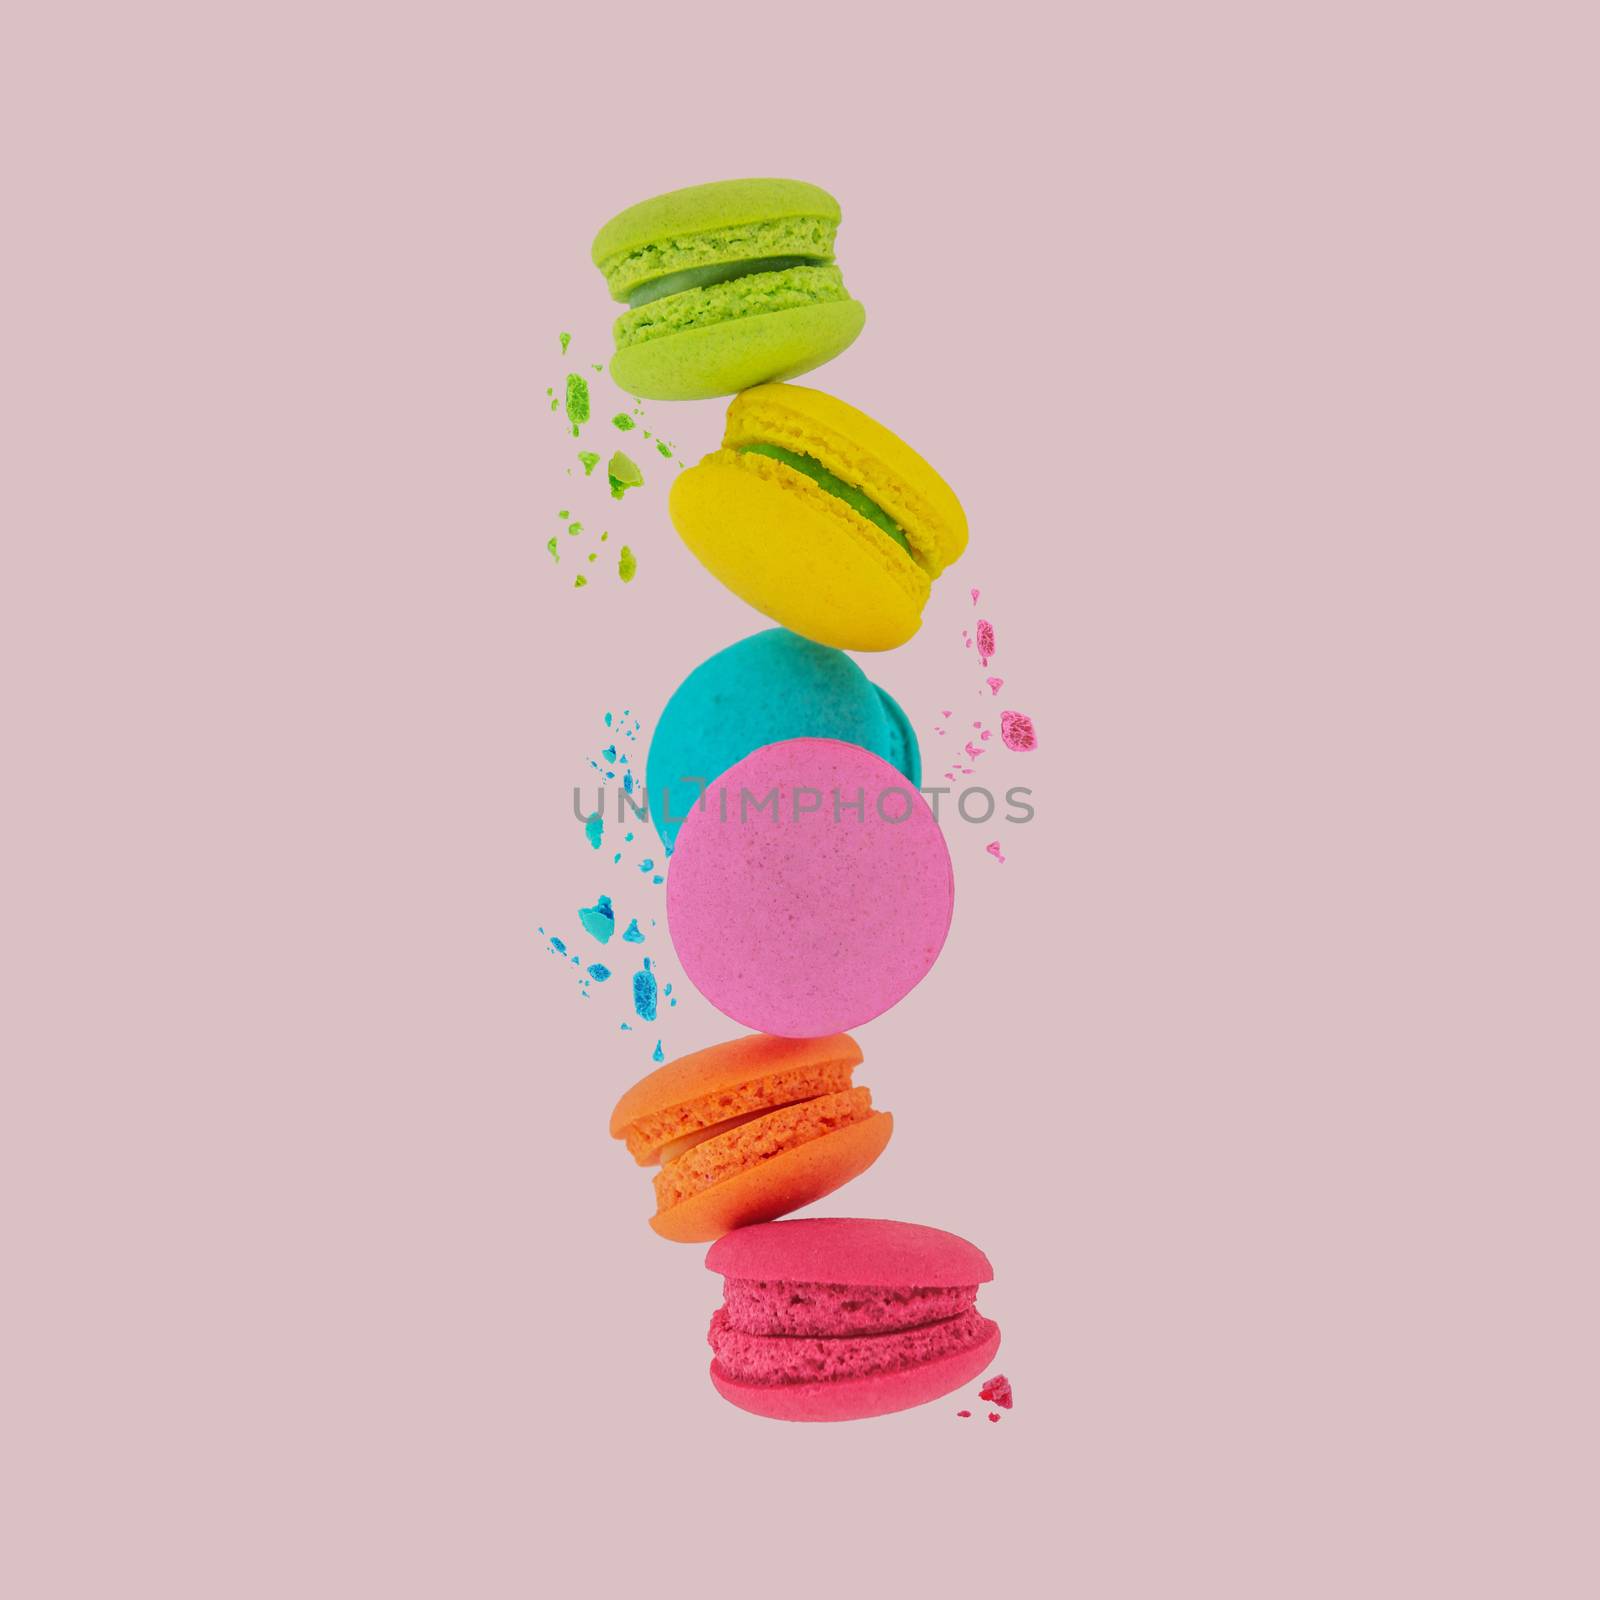 Macaroons. Sweet and colorful macaroons. by gutarphotoghaphy